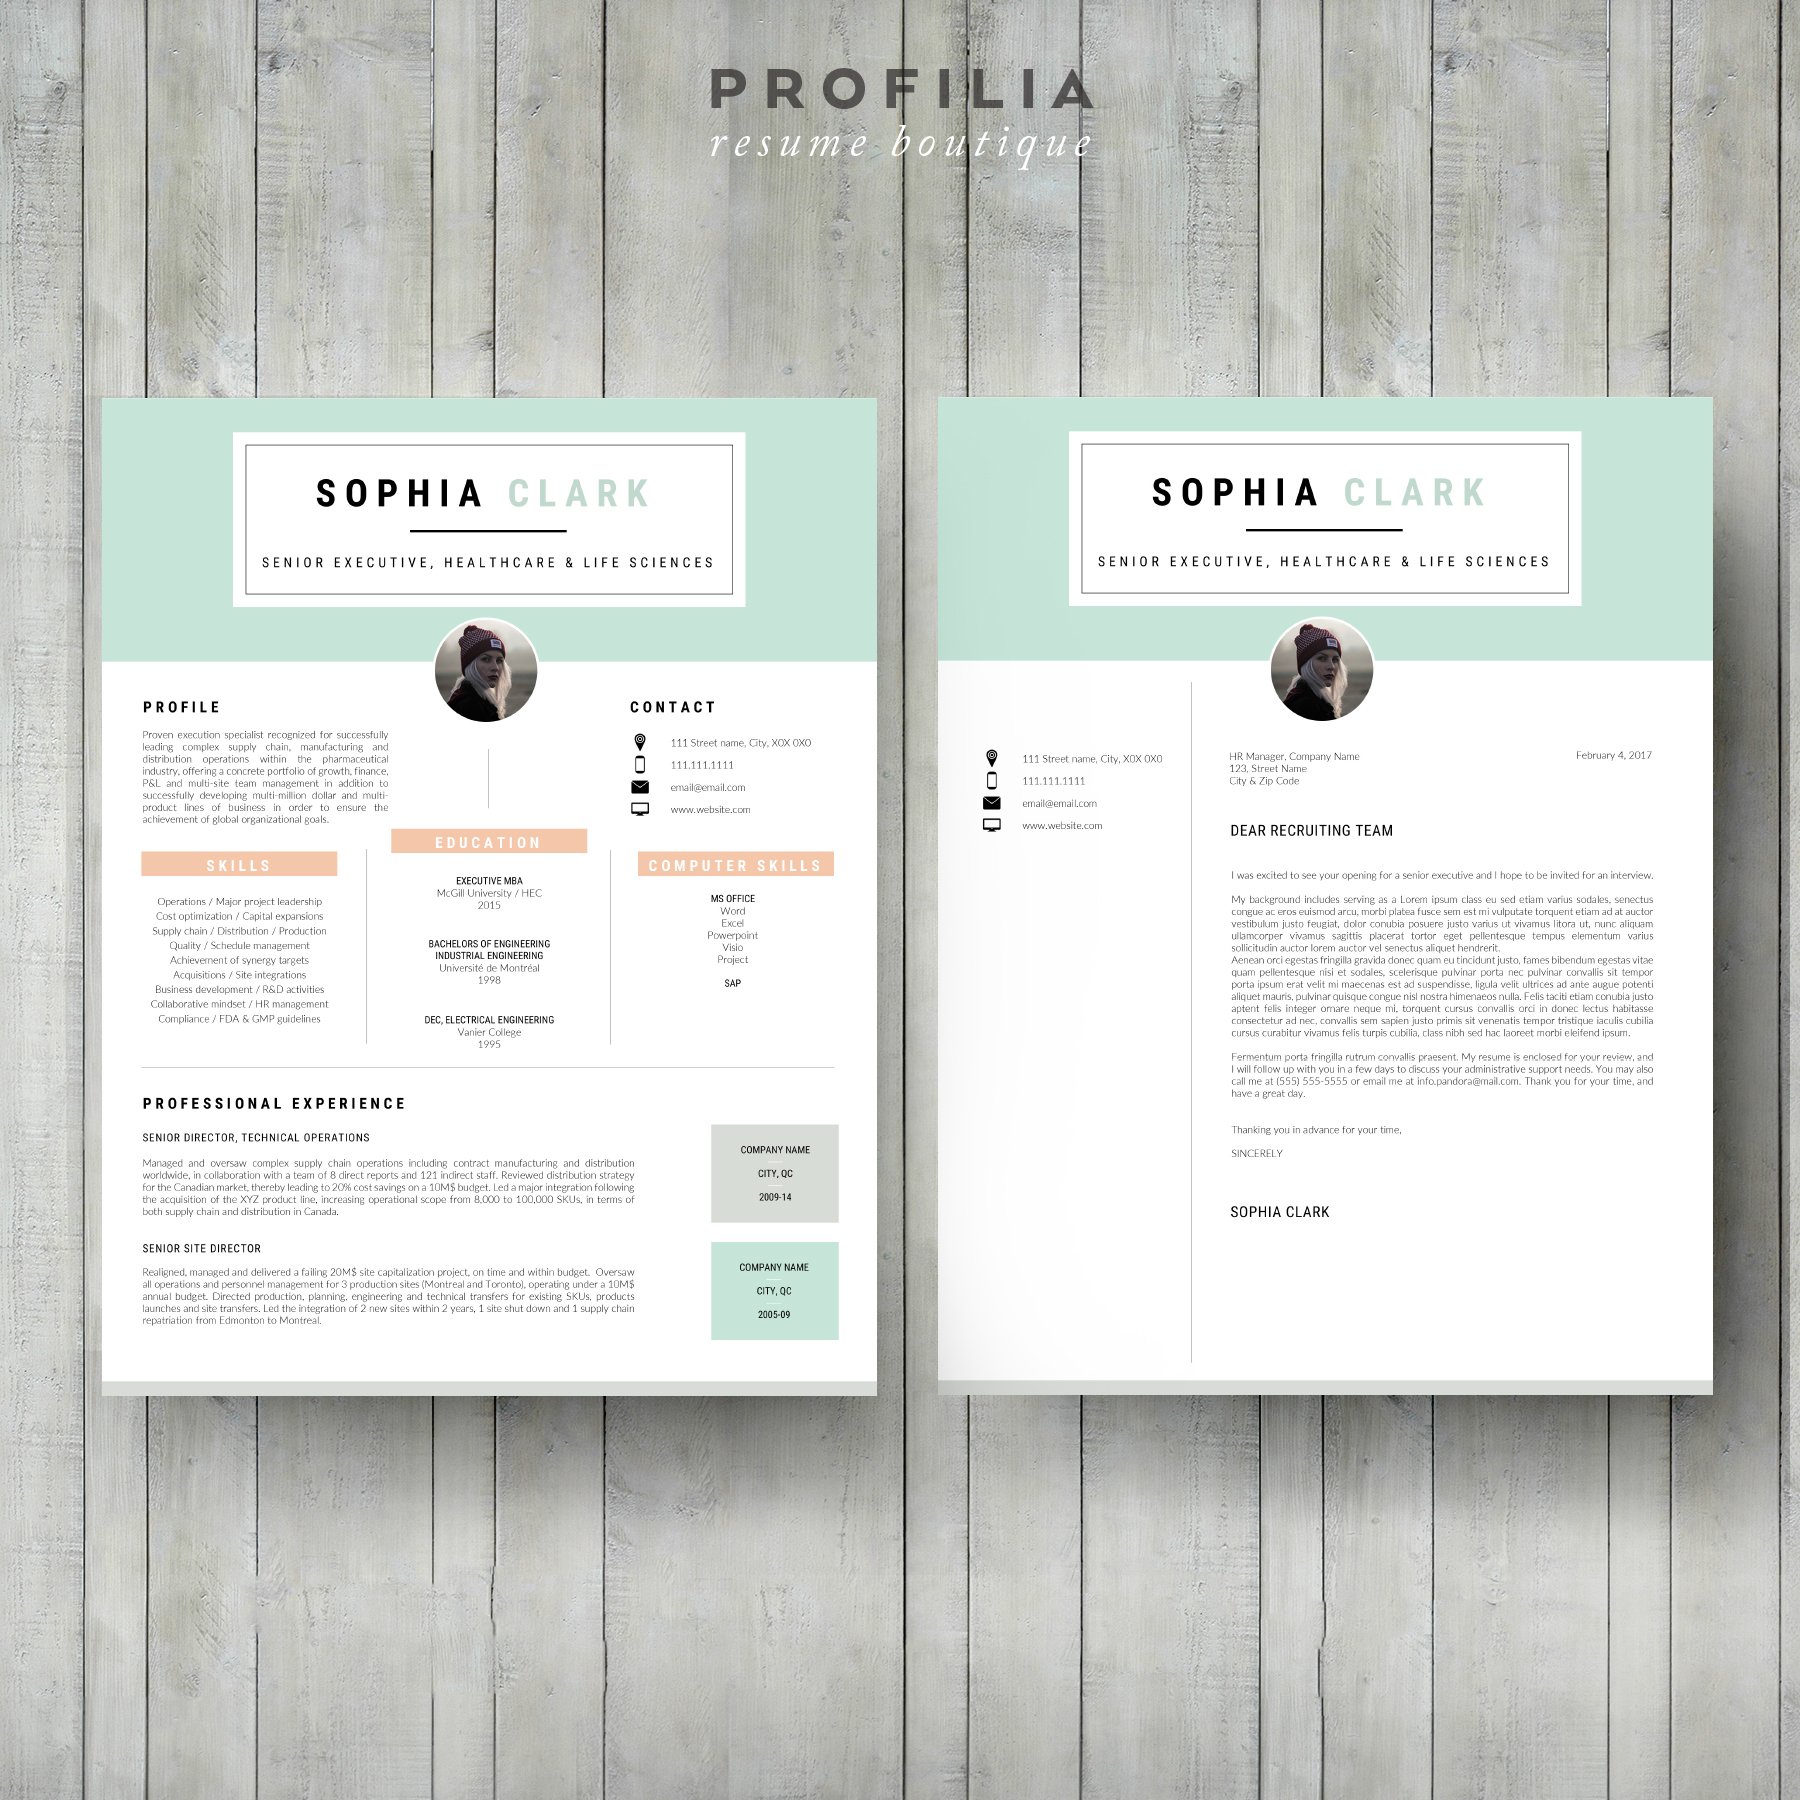 Two resume templates on a wooden background.